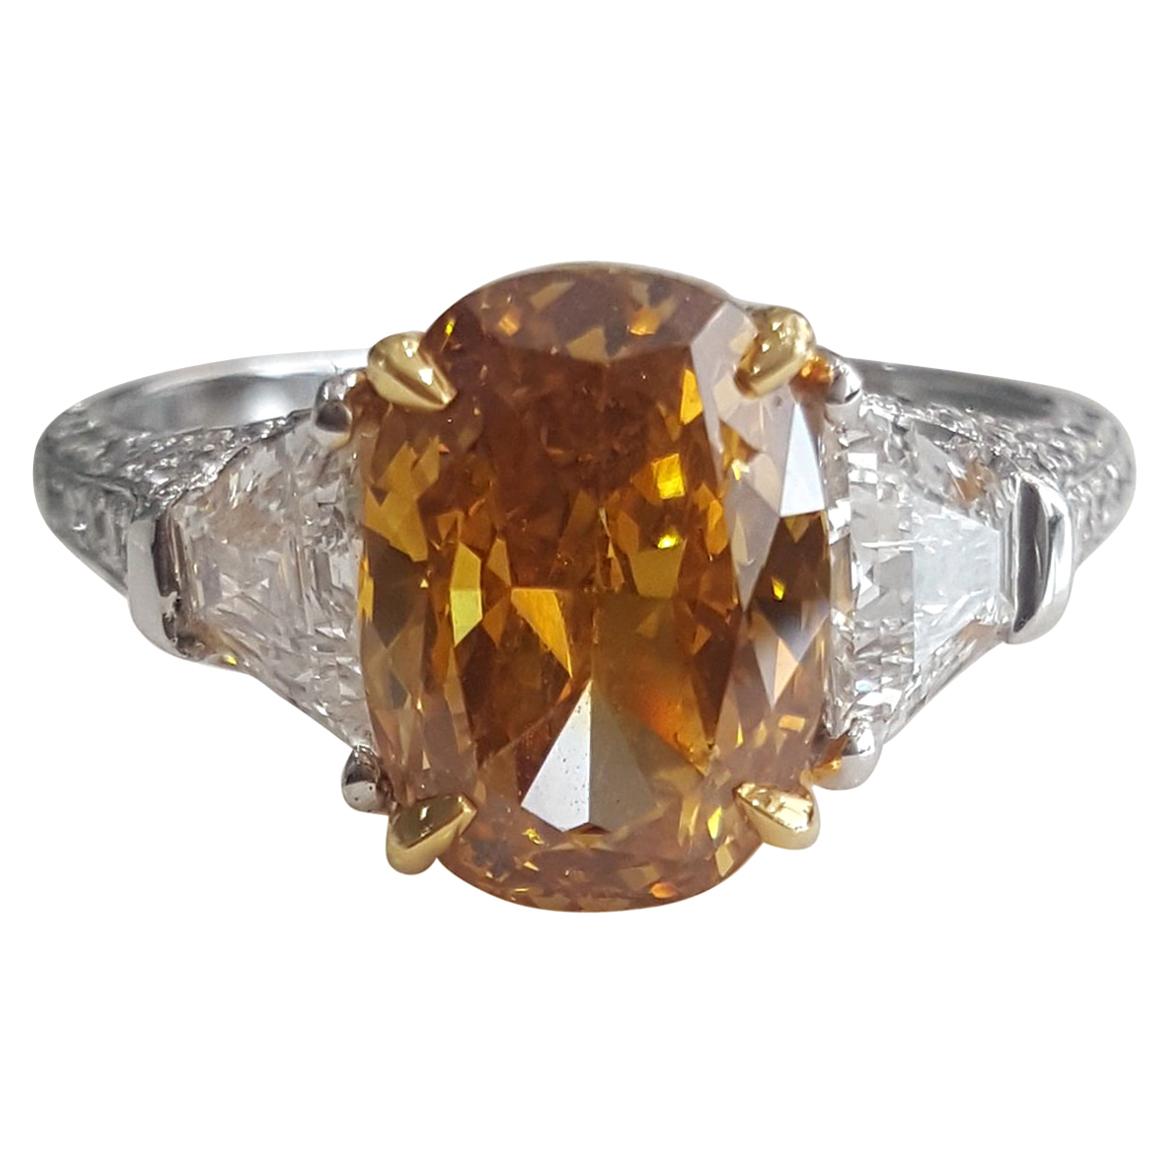 GIA 4.43 Carat Natural Fancy Deep Orange Yellow Oval And White Diamond Ring.  For Sale